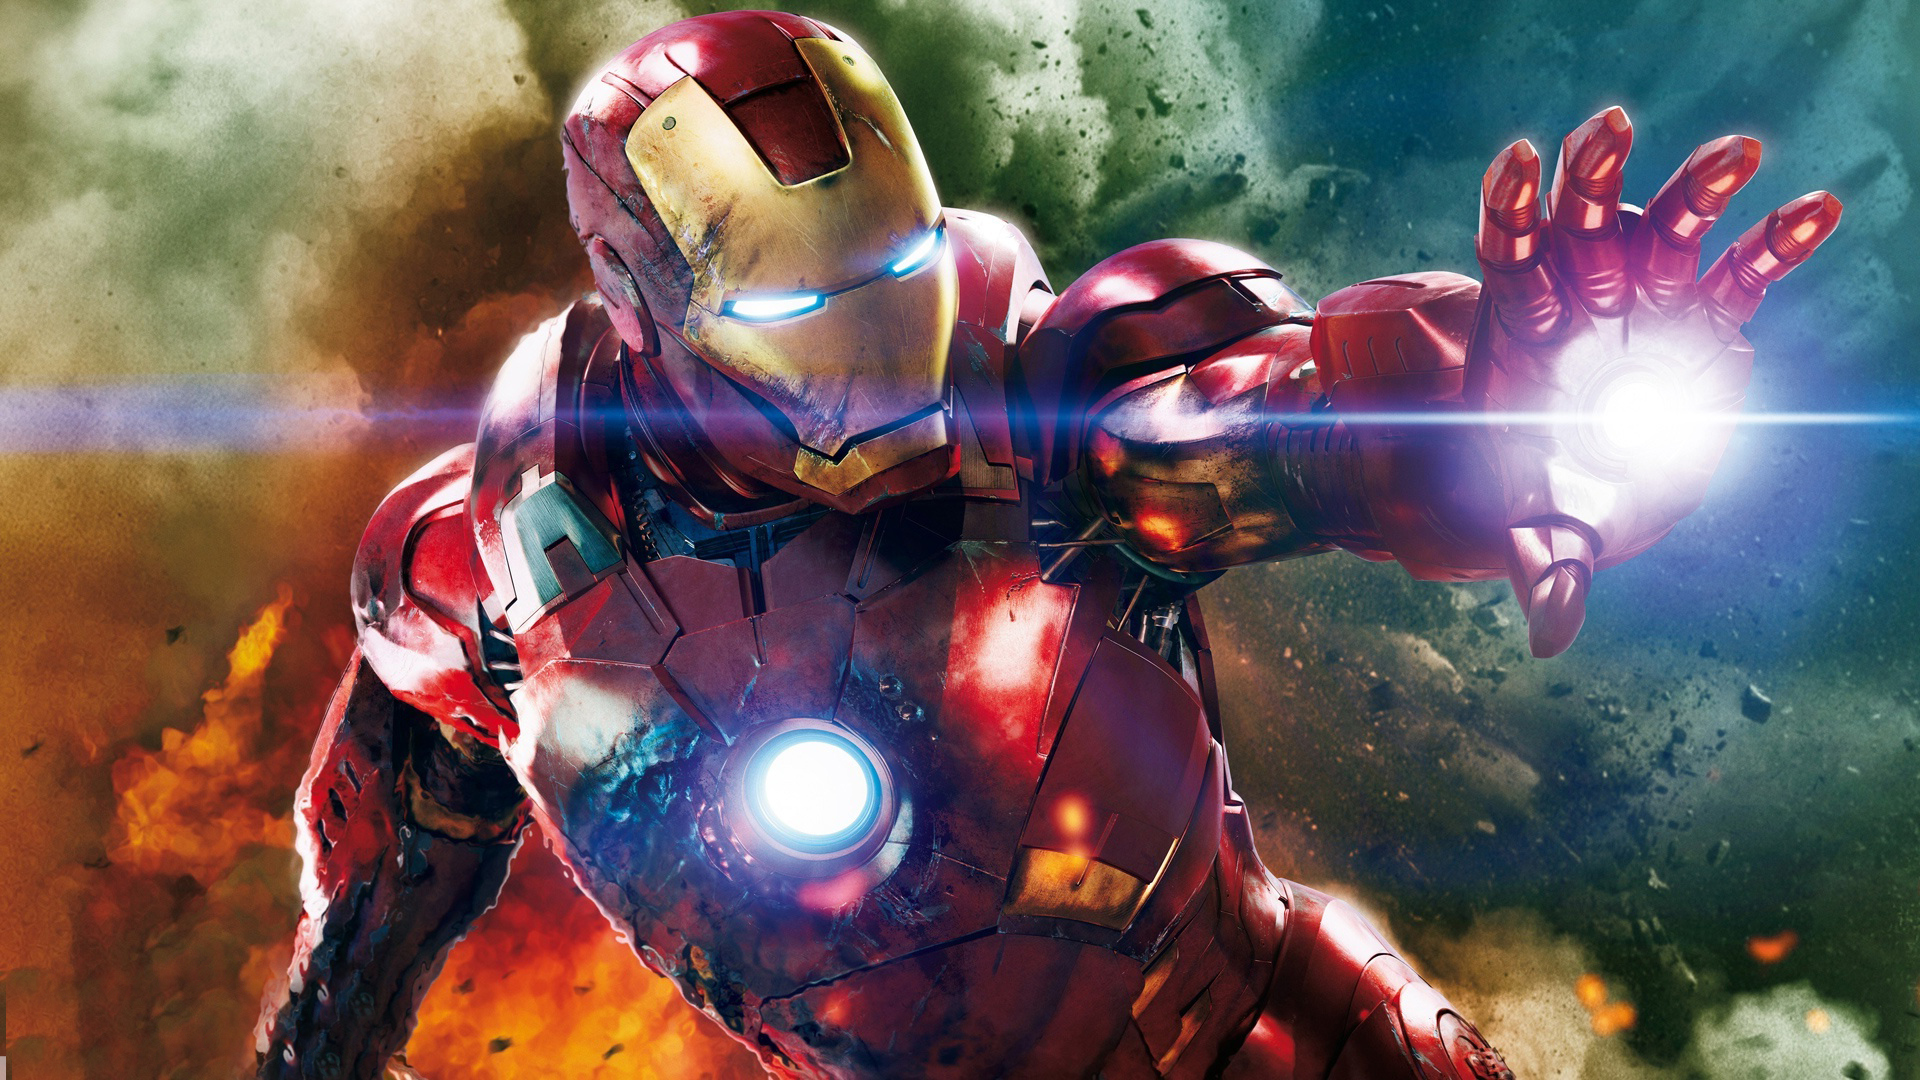 Look out, War Machine: U.S. gov't getting ready to unveil its 'Iron Man' project | Blastr